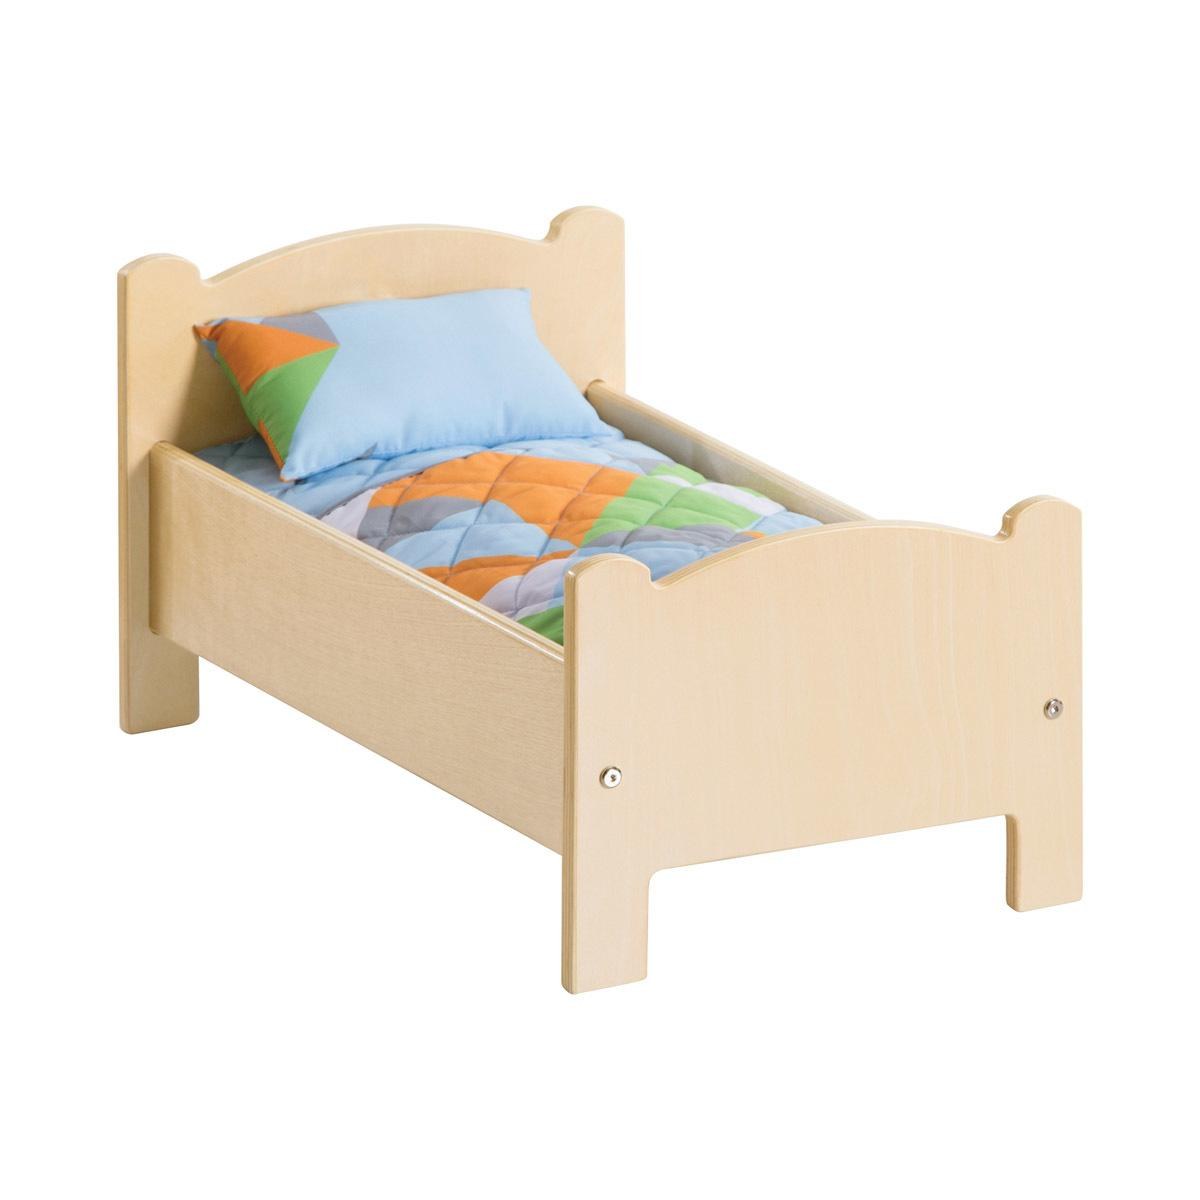 Kaplan Early Learning Company Wooden Doll Bed with Bedding